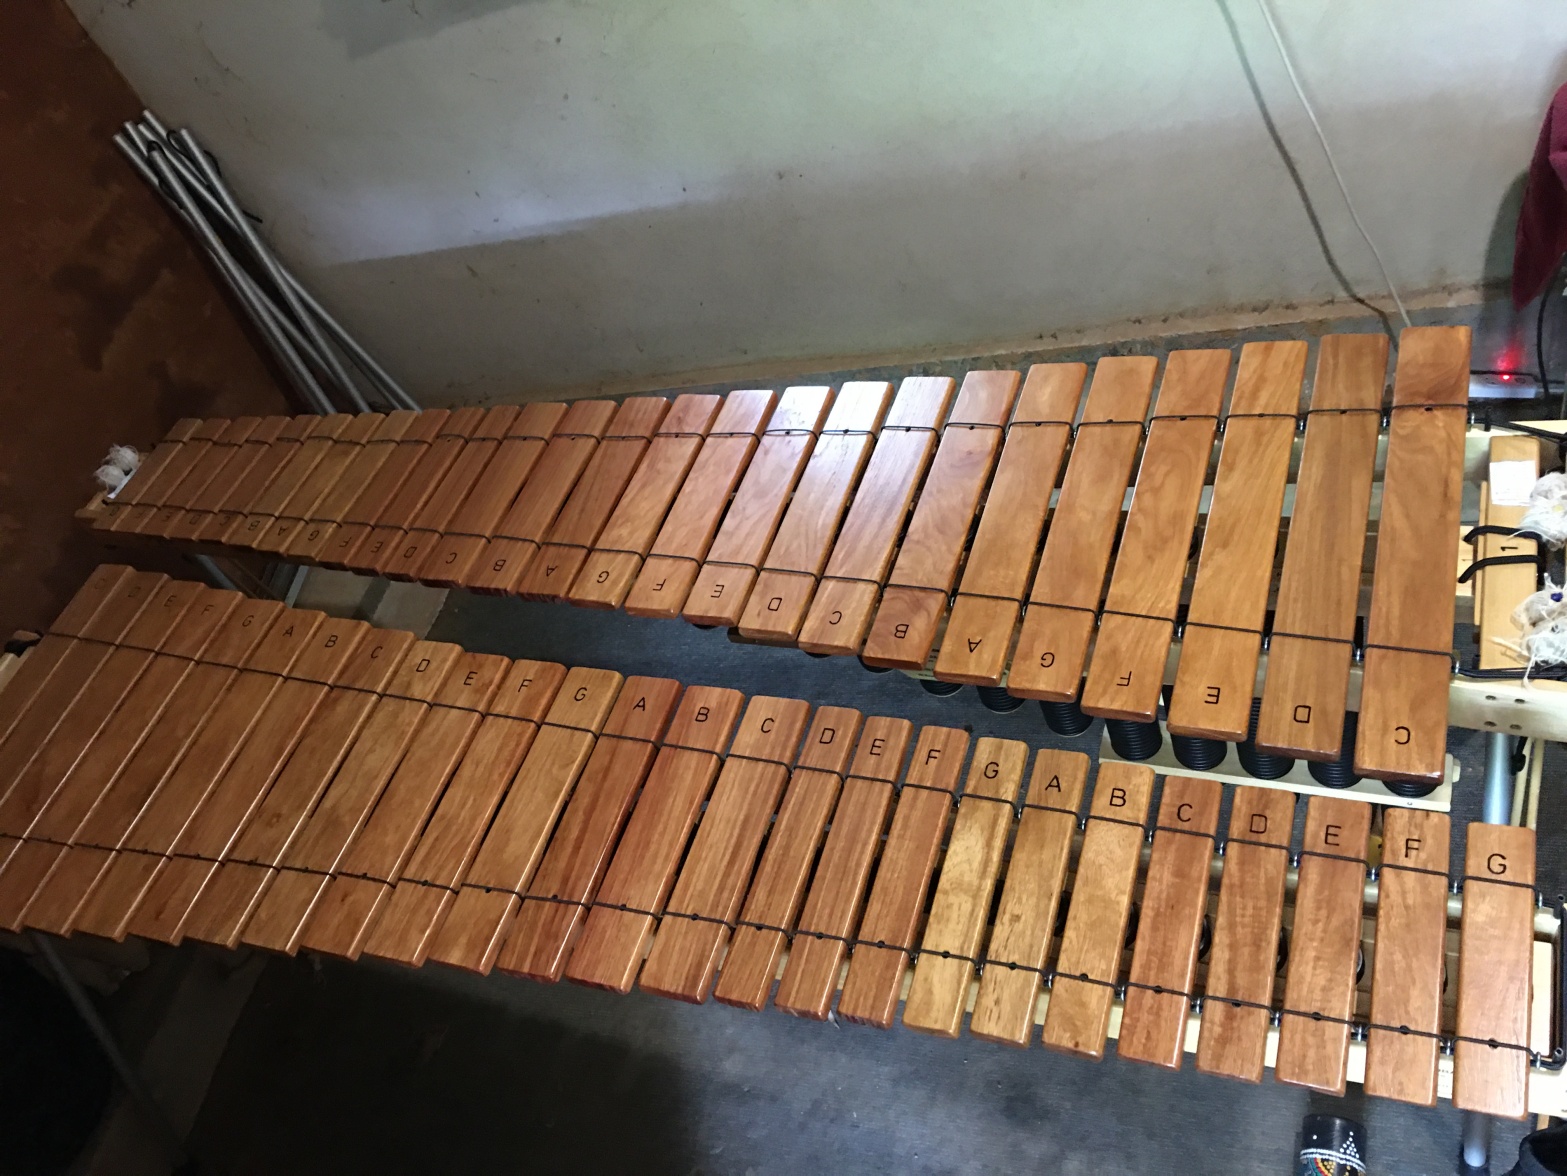 Our new 3.5 octave marimbas